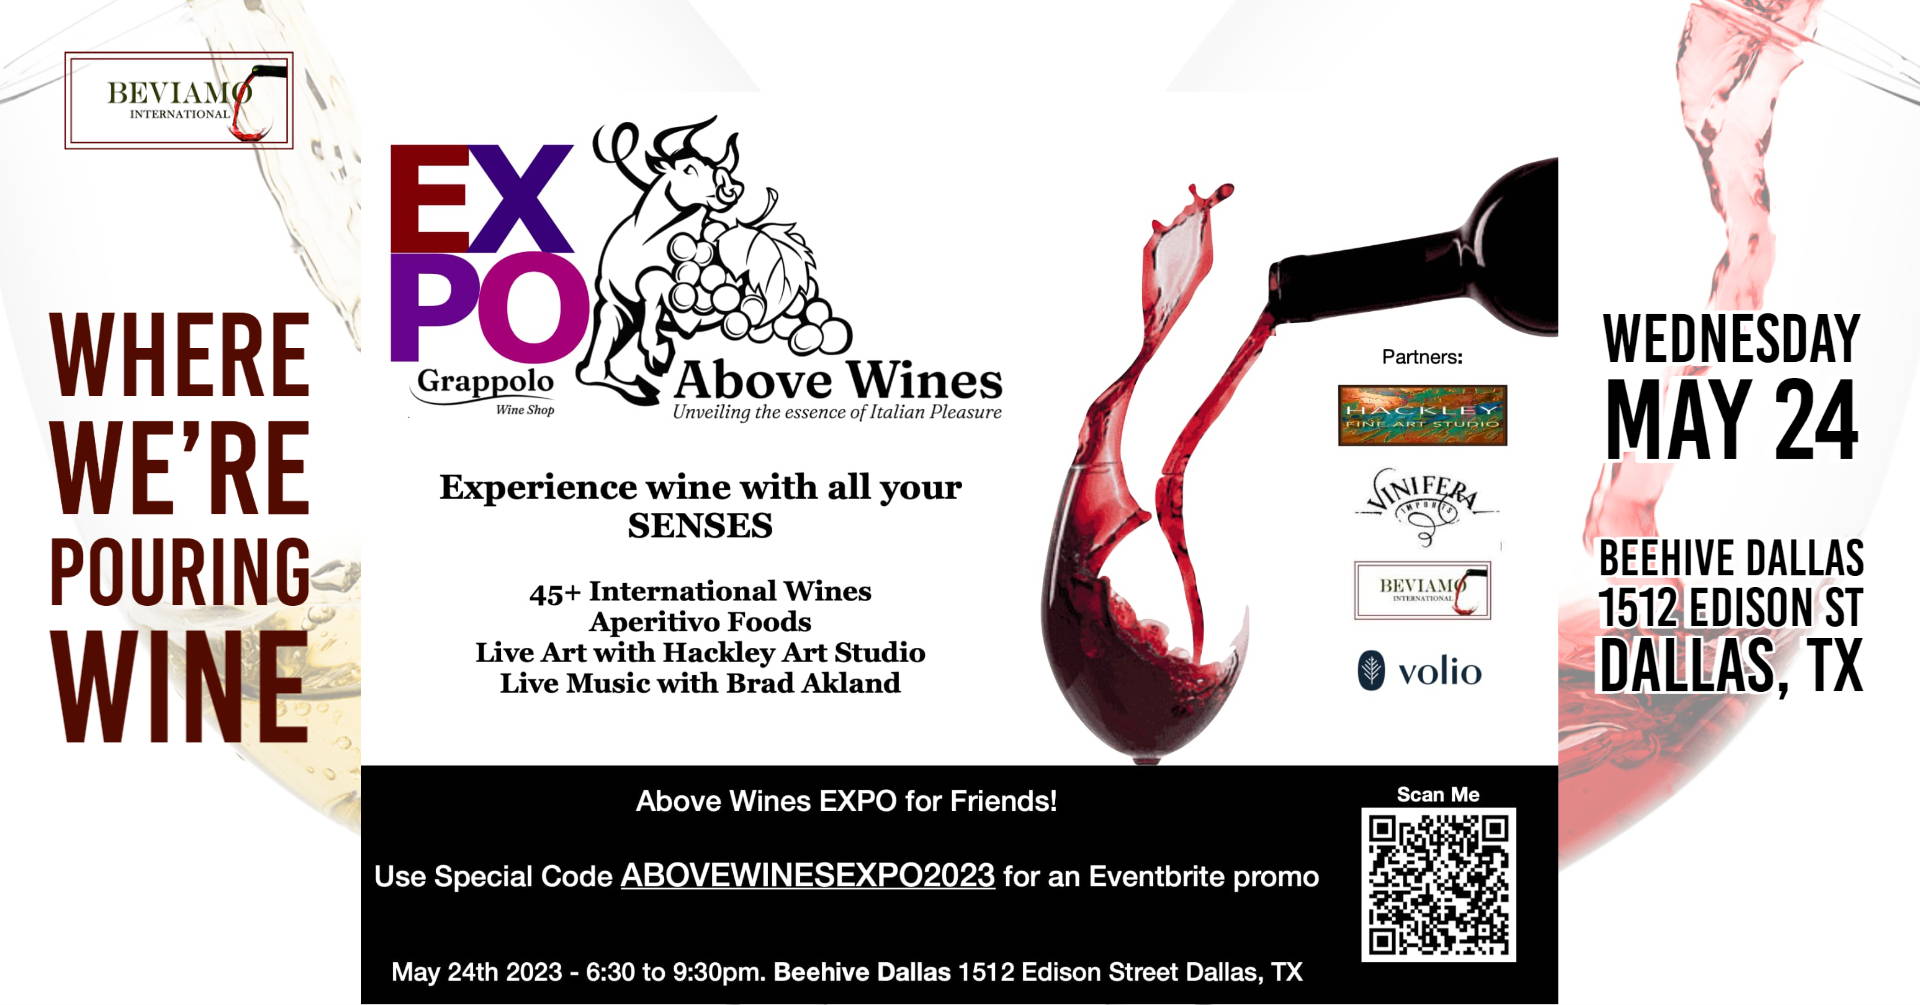 Above Wines EXPO